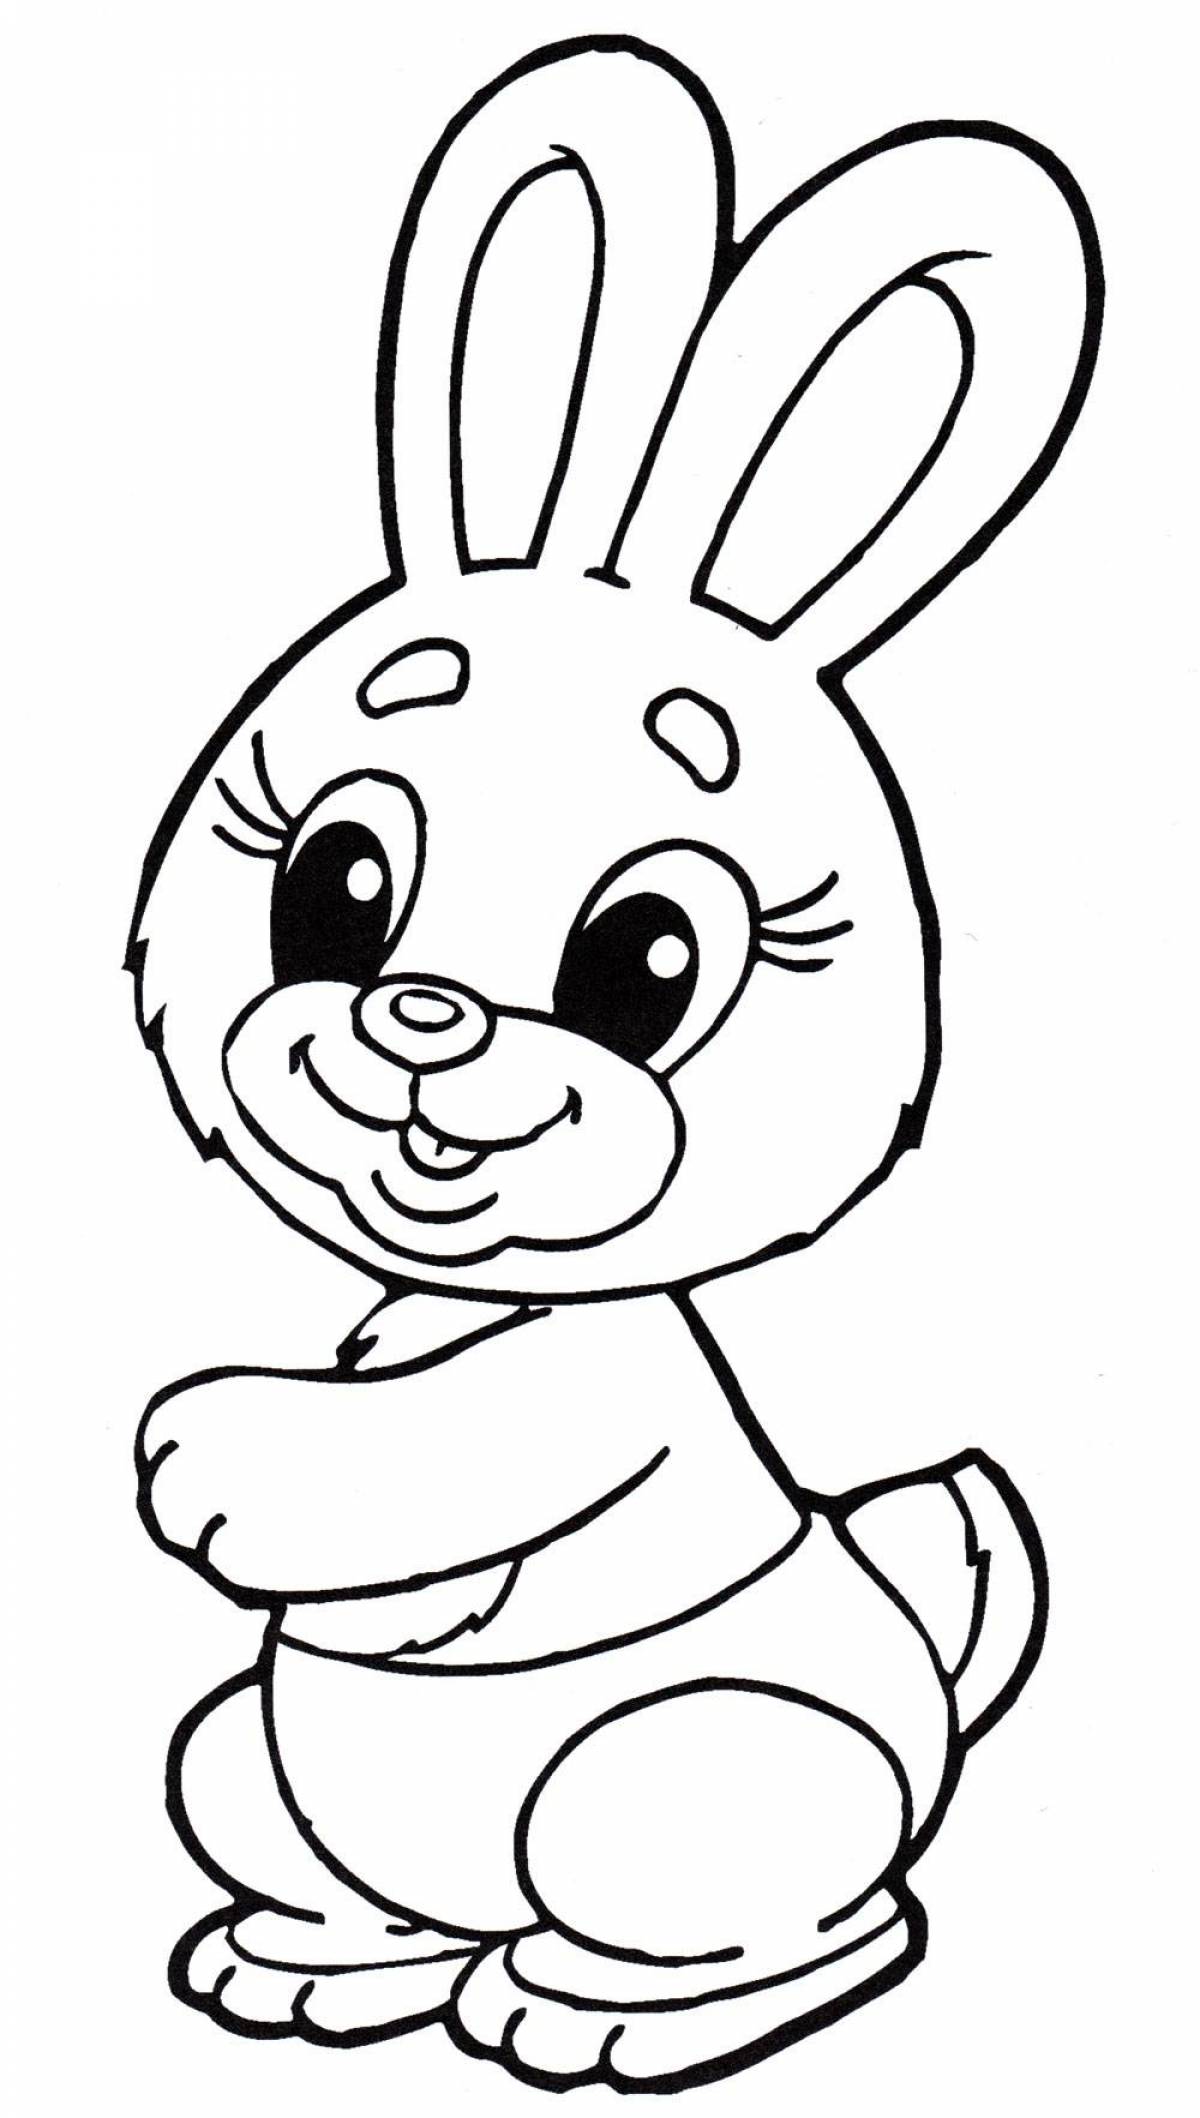 Exciting hare coloring page for kids